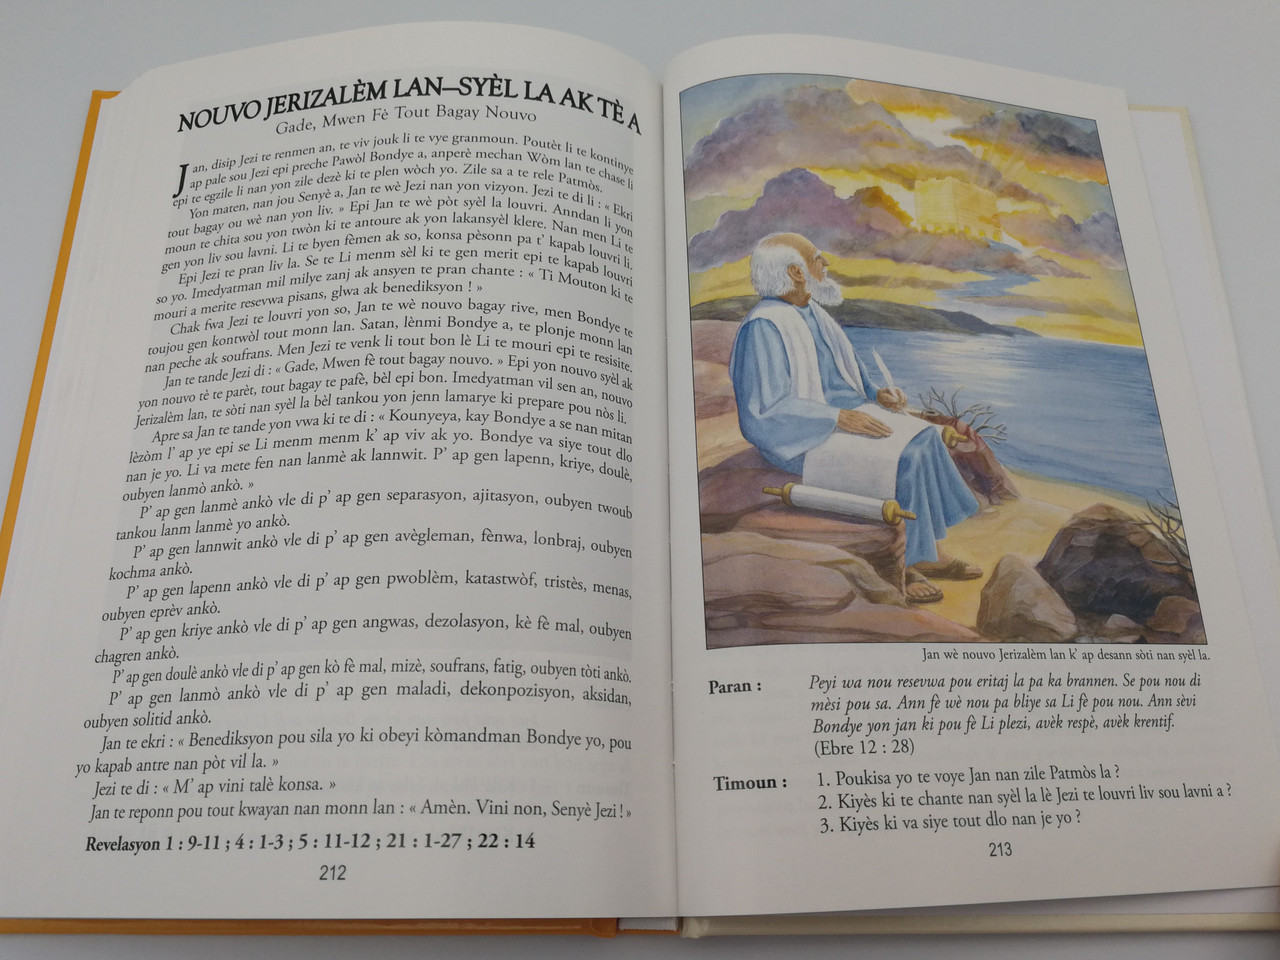 101 Pi Bél Istwa Nan Bib la by Ura Miller / Haitian Creole edition of 101  Favorite Stories from the Bible / Illustrations by Gloria Oostema /  Hardcover / TGS International 